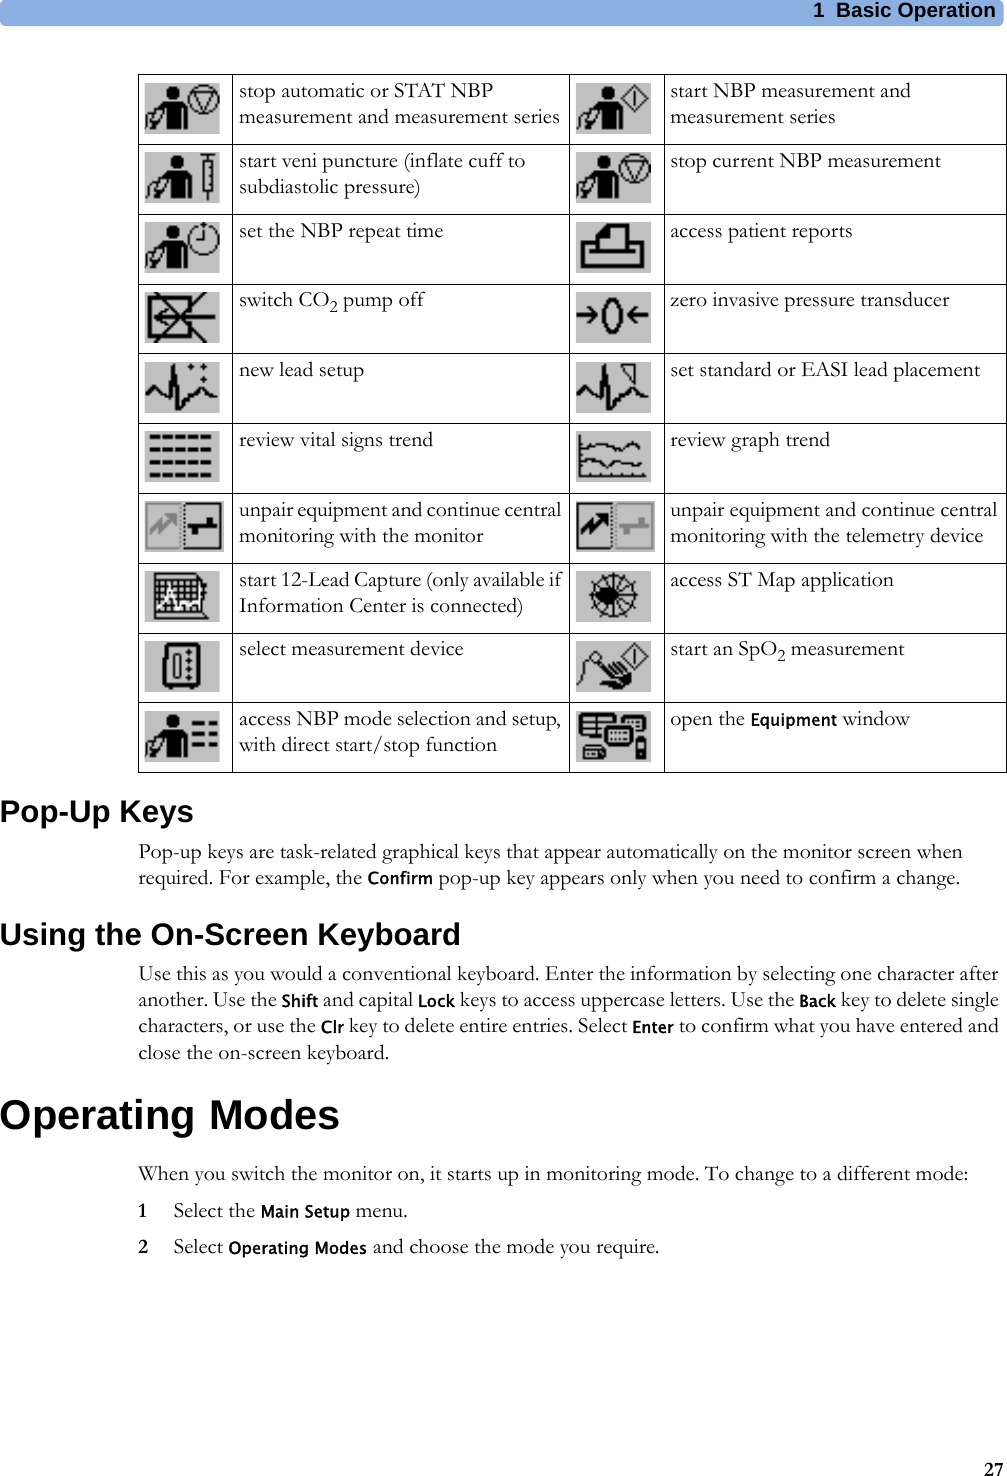 1 Basic Operation27Pop-Up KeysPop-up keys are task-related graphical keys that appear automatically on the monitor screen when required. For example, the Confirm pop-up key appears only when you need to confirm a change.Using the On-Screen KeyboardUse this as you would a conventional keyboard. Enter the information by selecting one character after another. Use the Shift and capital Lock keys to access uppercase letters. Use the Back key to delete single characters, or use the Clr key to delete entire entries. Select Enter to confirm what you have entered and close the on-screen keyboard.Operating ModesWhen you switch the monitor on, it starts up in monitoring mode. To change to a different mode:1Select the Main Setup menu.2Select Operating Modes and choose the mode you require.stop automatic or STAT NBP measurement and measurement seriesstart NBP measurement and measurement seriesstart veni puncture (inflate cuff to subdiastolic pressure)stop current NBP measurementset the NBP repeat time access patient reportsswitch CO2 pump off zero invasive pressure transducernew lead setup set standard or EASI lead placementreview vital signs trend review graph trendunpair equipment and continue central monitoring with the monitorunpair equipment and continue central monitoring with the telemetry devicestart 12-Lead Capture (only available if Information Center is connected)access ST Map applicationselect measurement device start an SpO2 measurementaccess NBP mode selection and setup, with direct start/stop functionopen the Equipment window